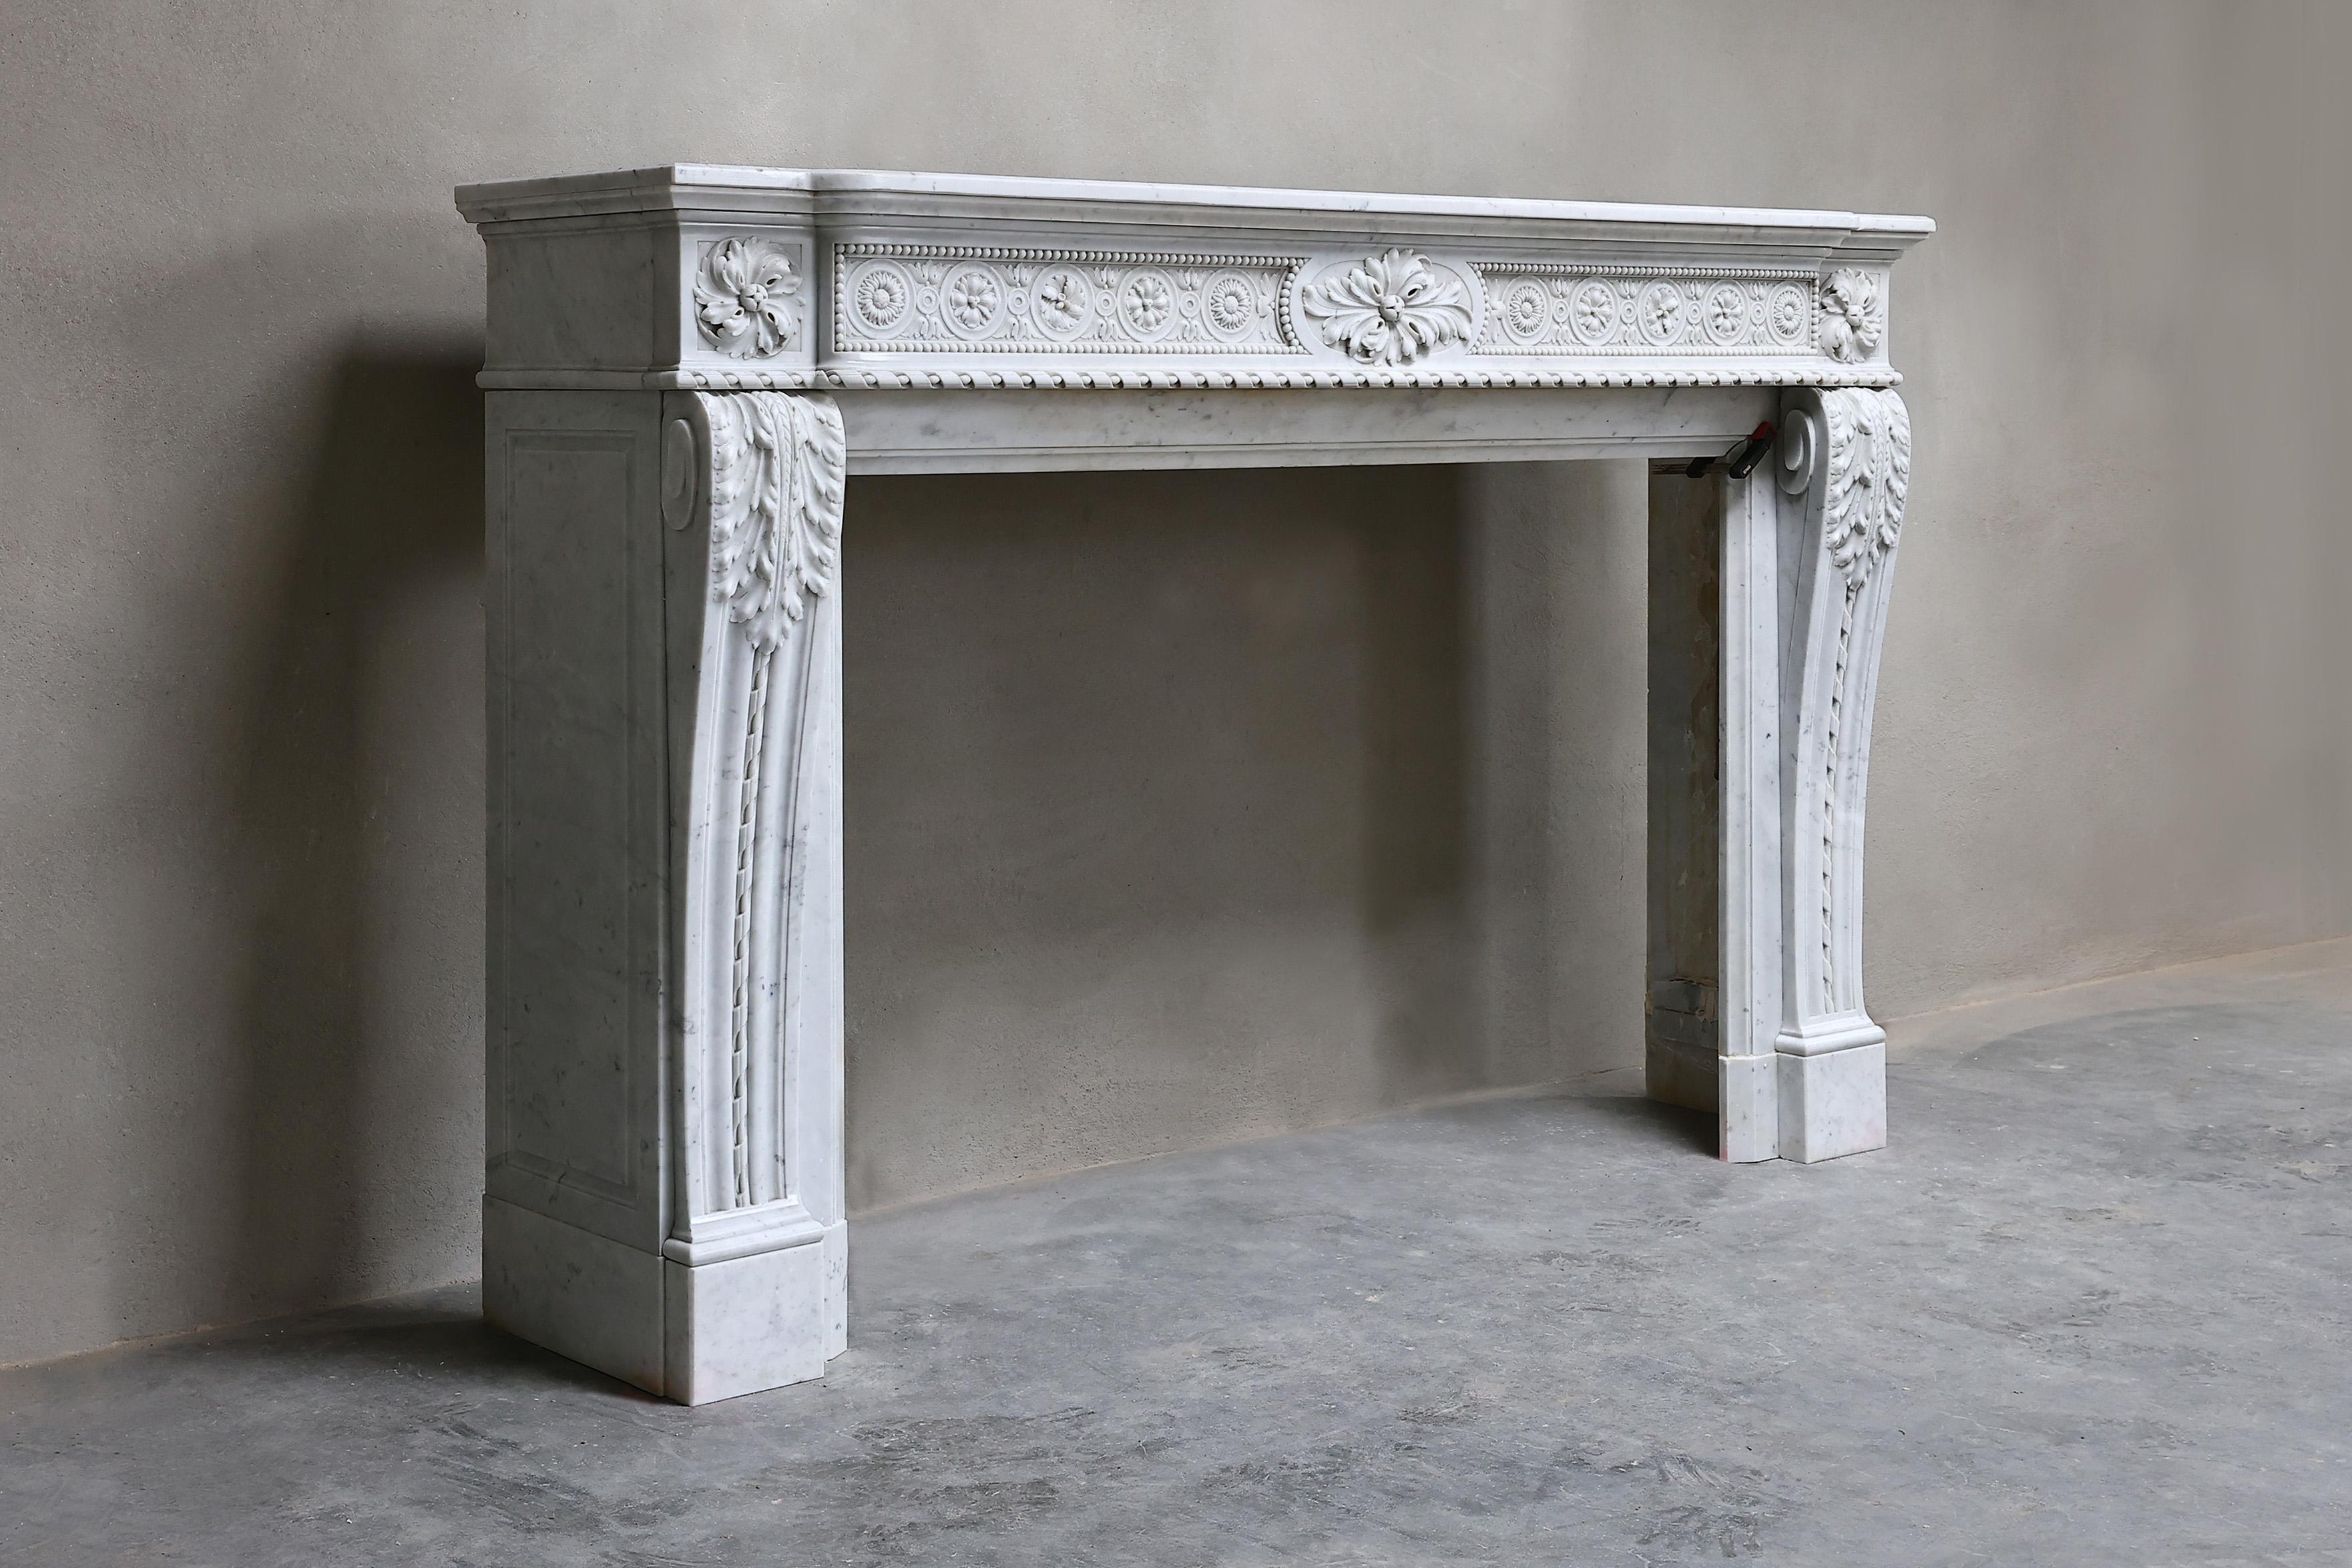 Very exclusive mantel of Carrara marble from Italy! A beautifully decorated fireplace in the style of Louis XVI with various ornaments in the front part of the fireplace and on the legs! This fireplace from the 19th century is chic and has an